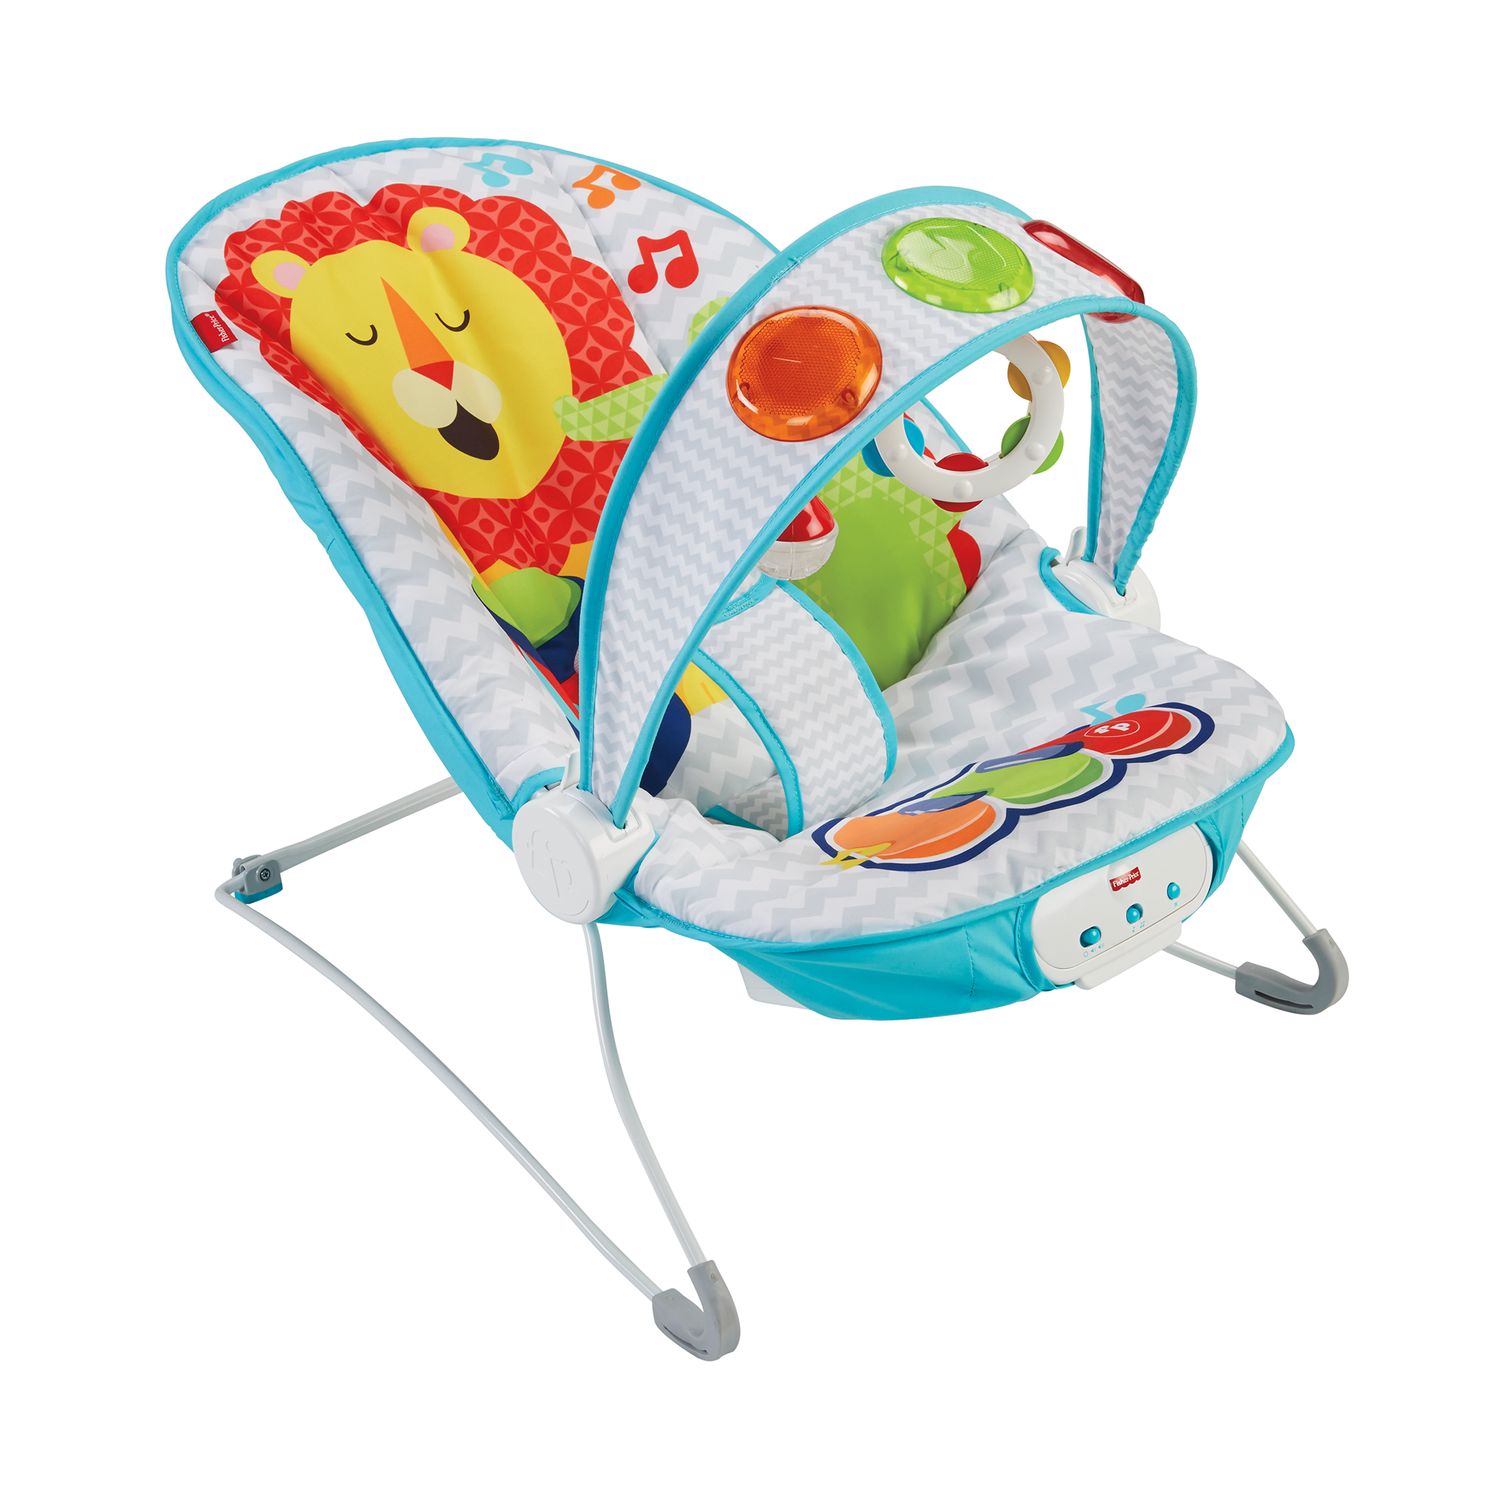 fisher price bouncy chair jungle